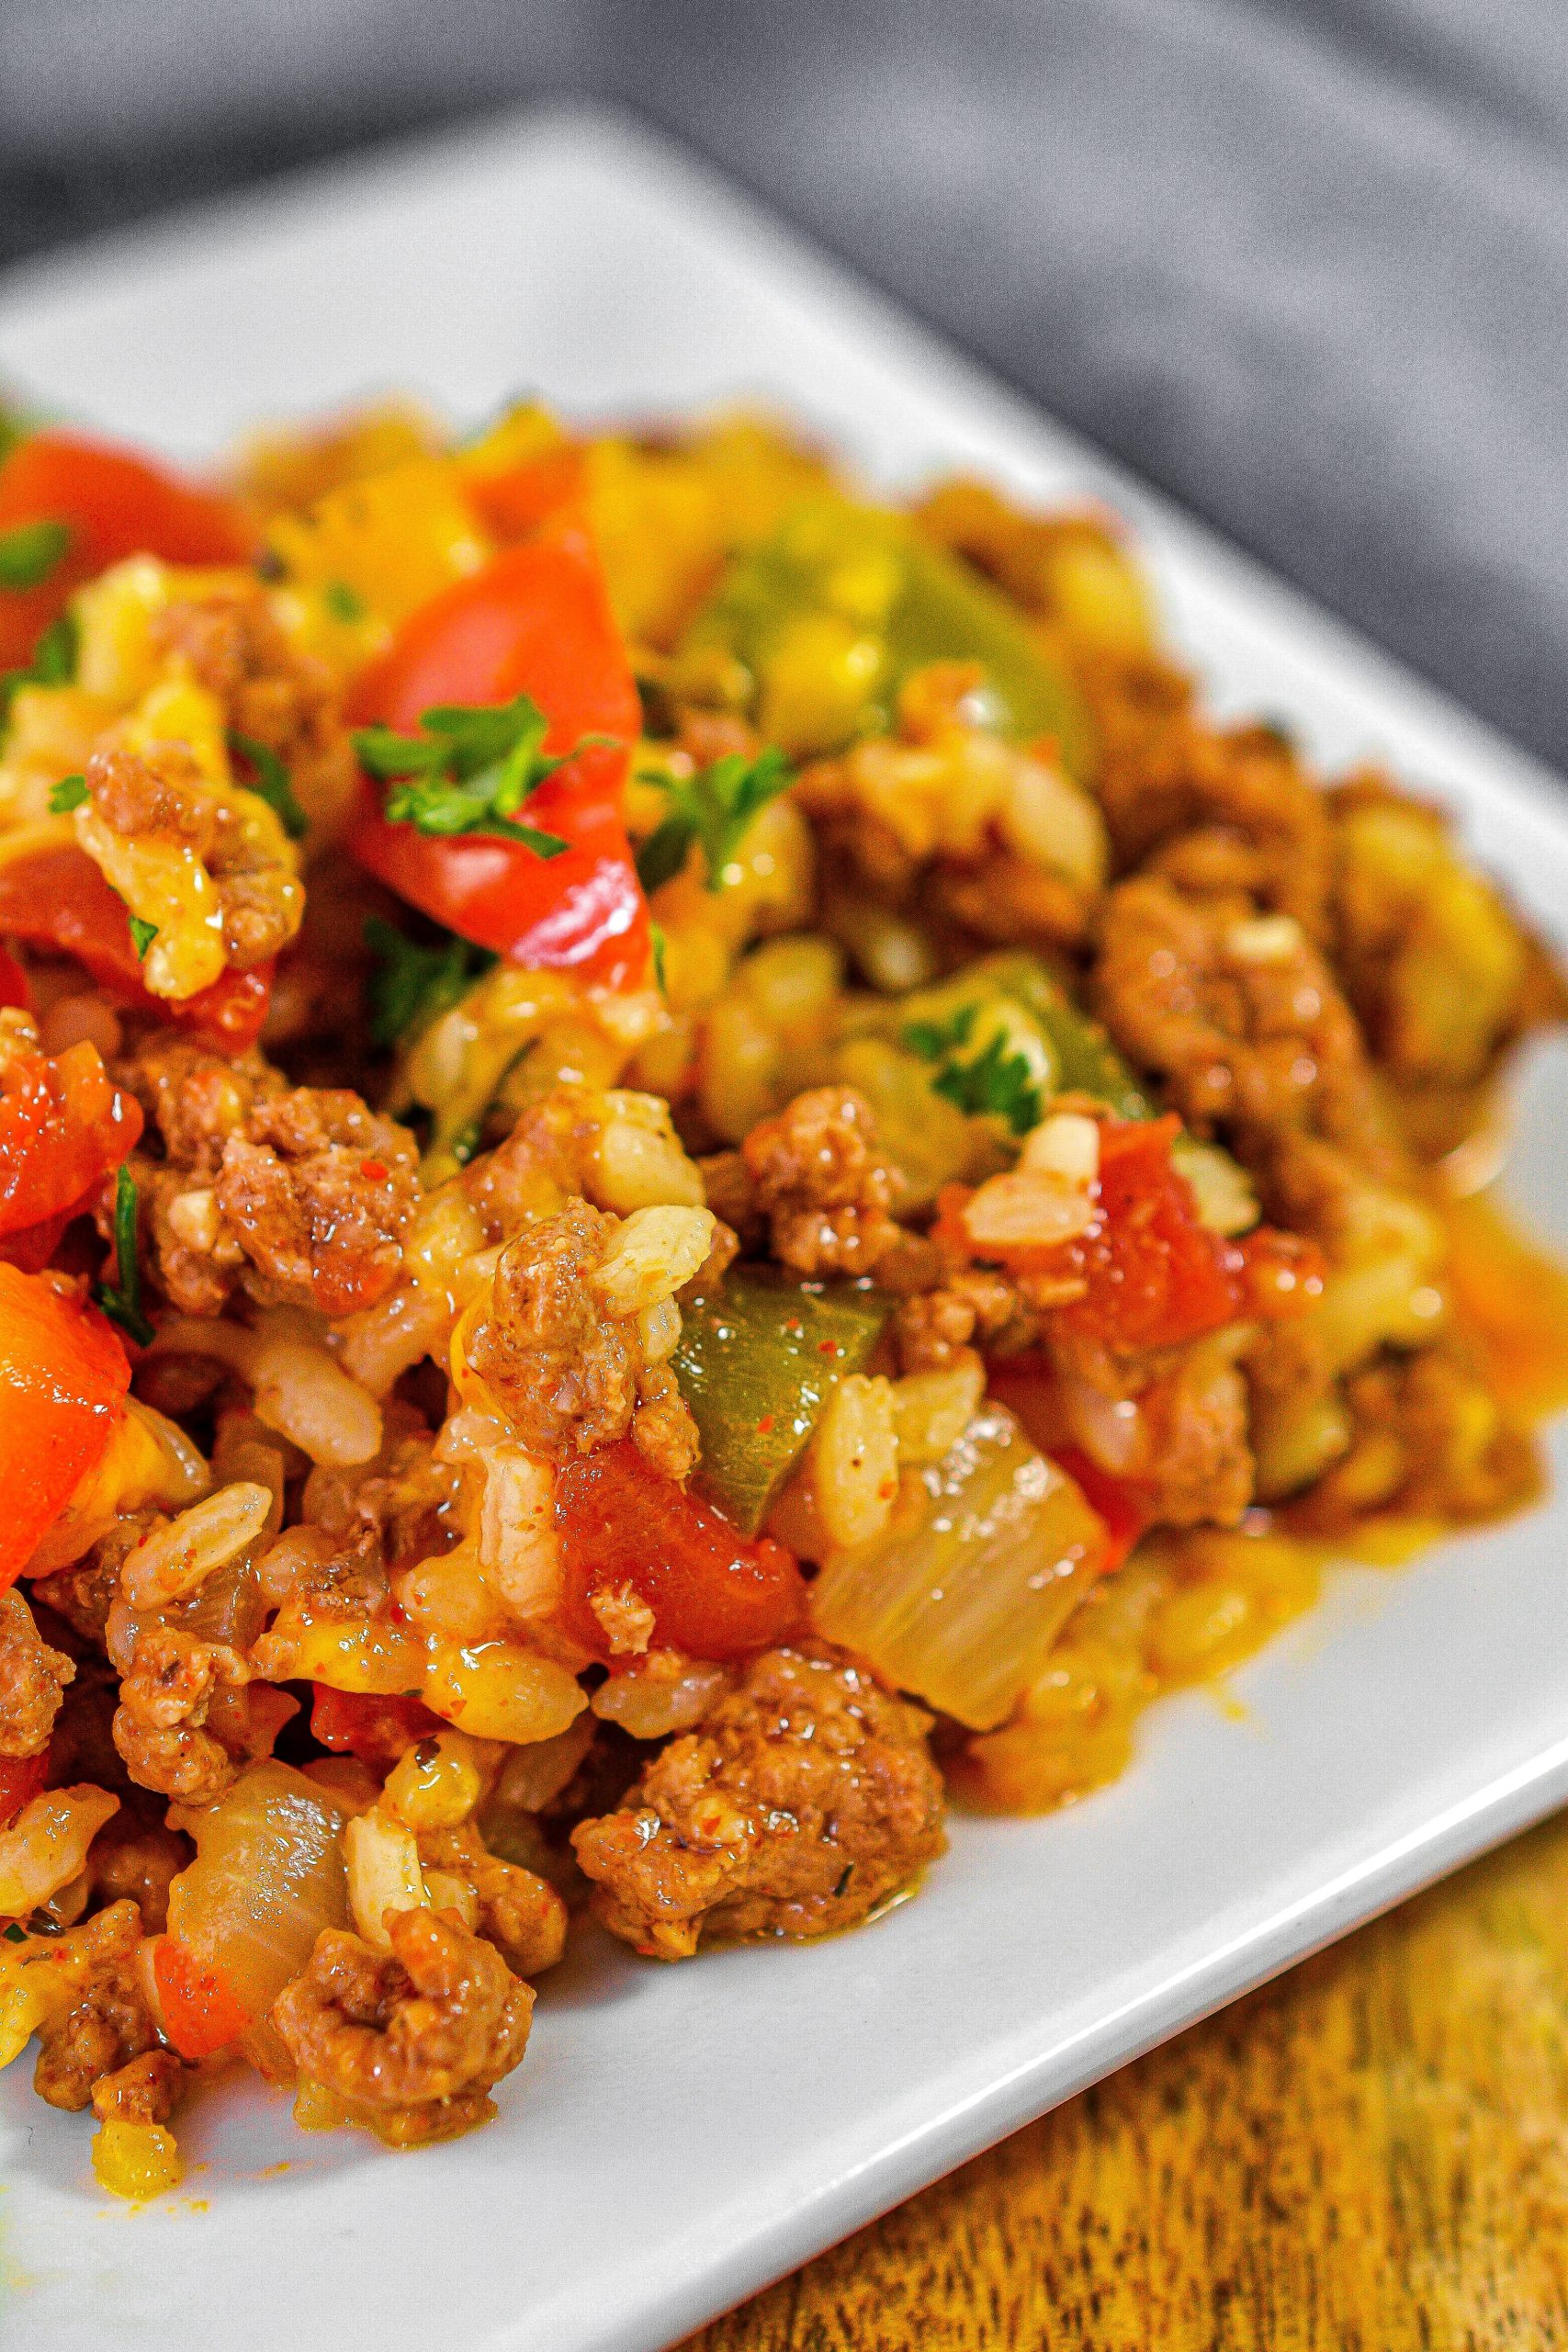 Ground beef and peppers skillet, ground beef peppers onions, ground beef recipes, green pepper recipes